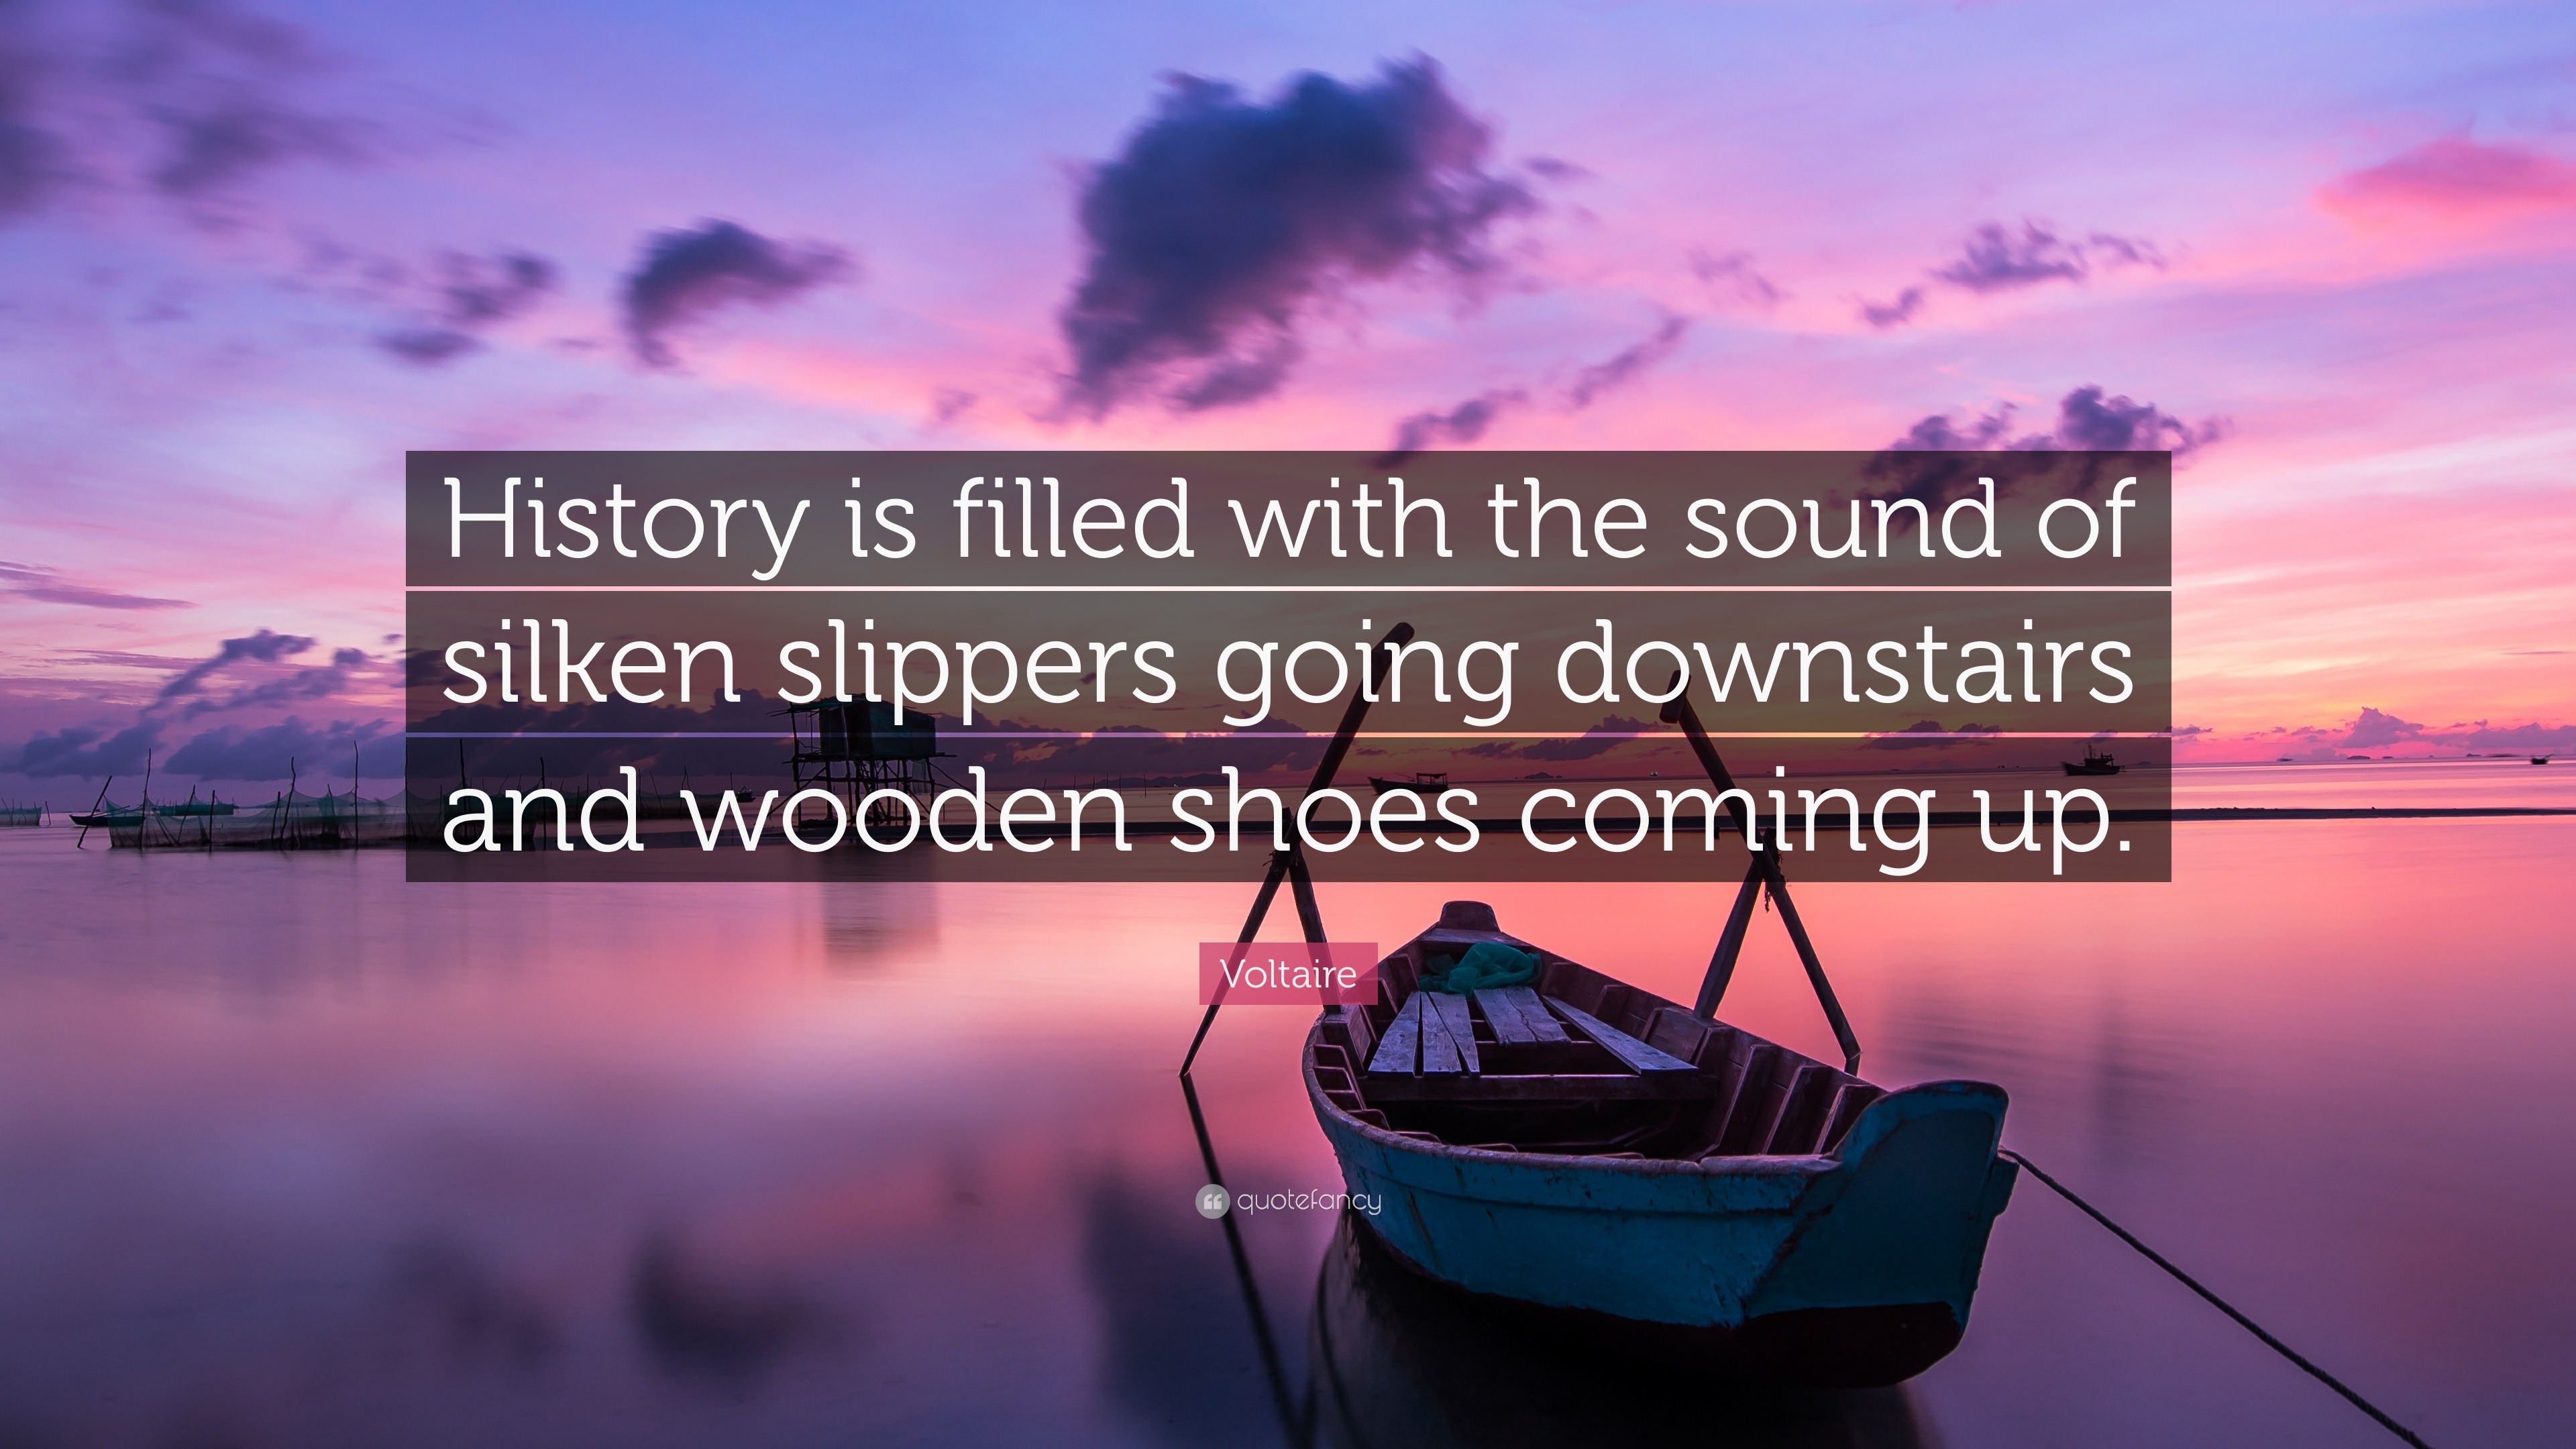 Voltaire Quote: “History is filled with the sound of silken slippers going downstairs wooden shoes